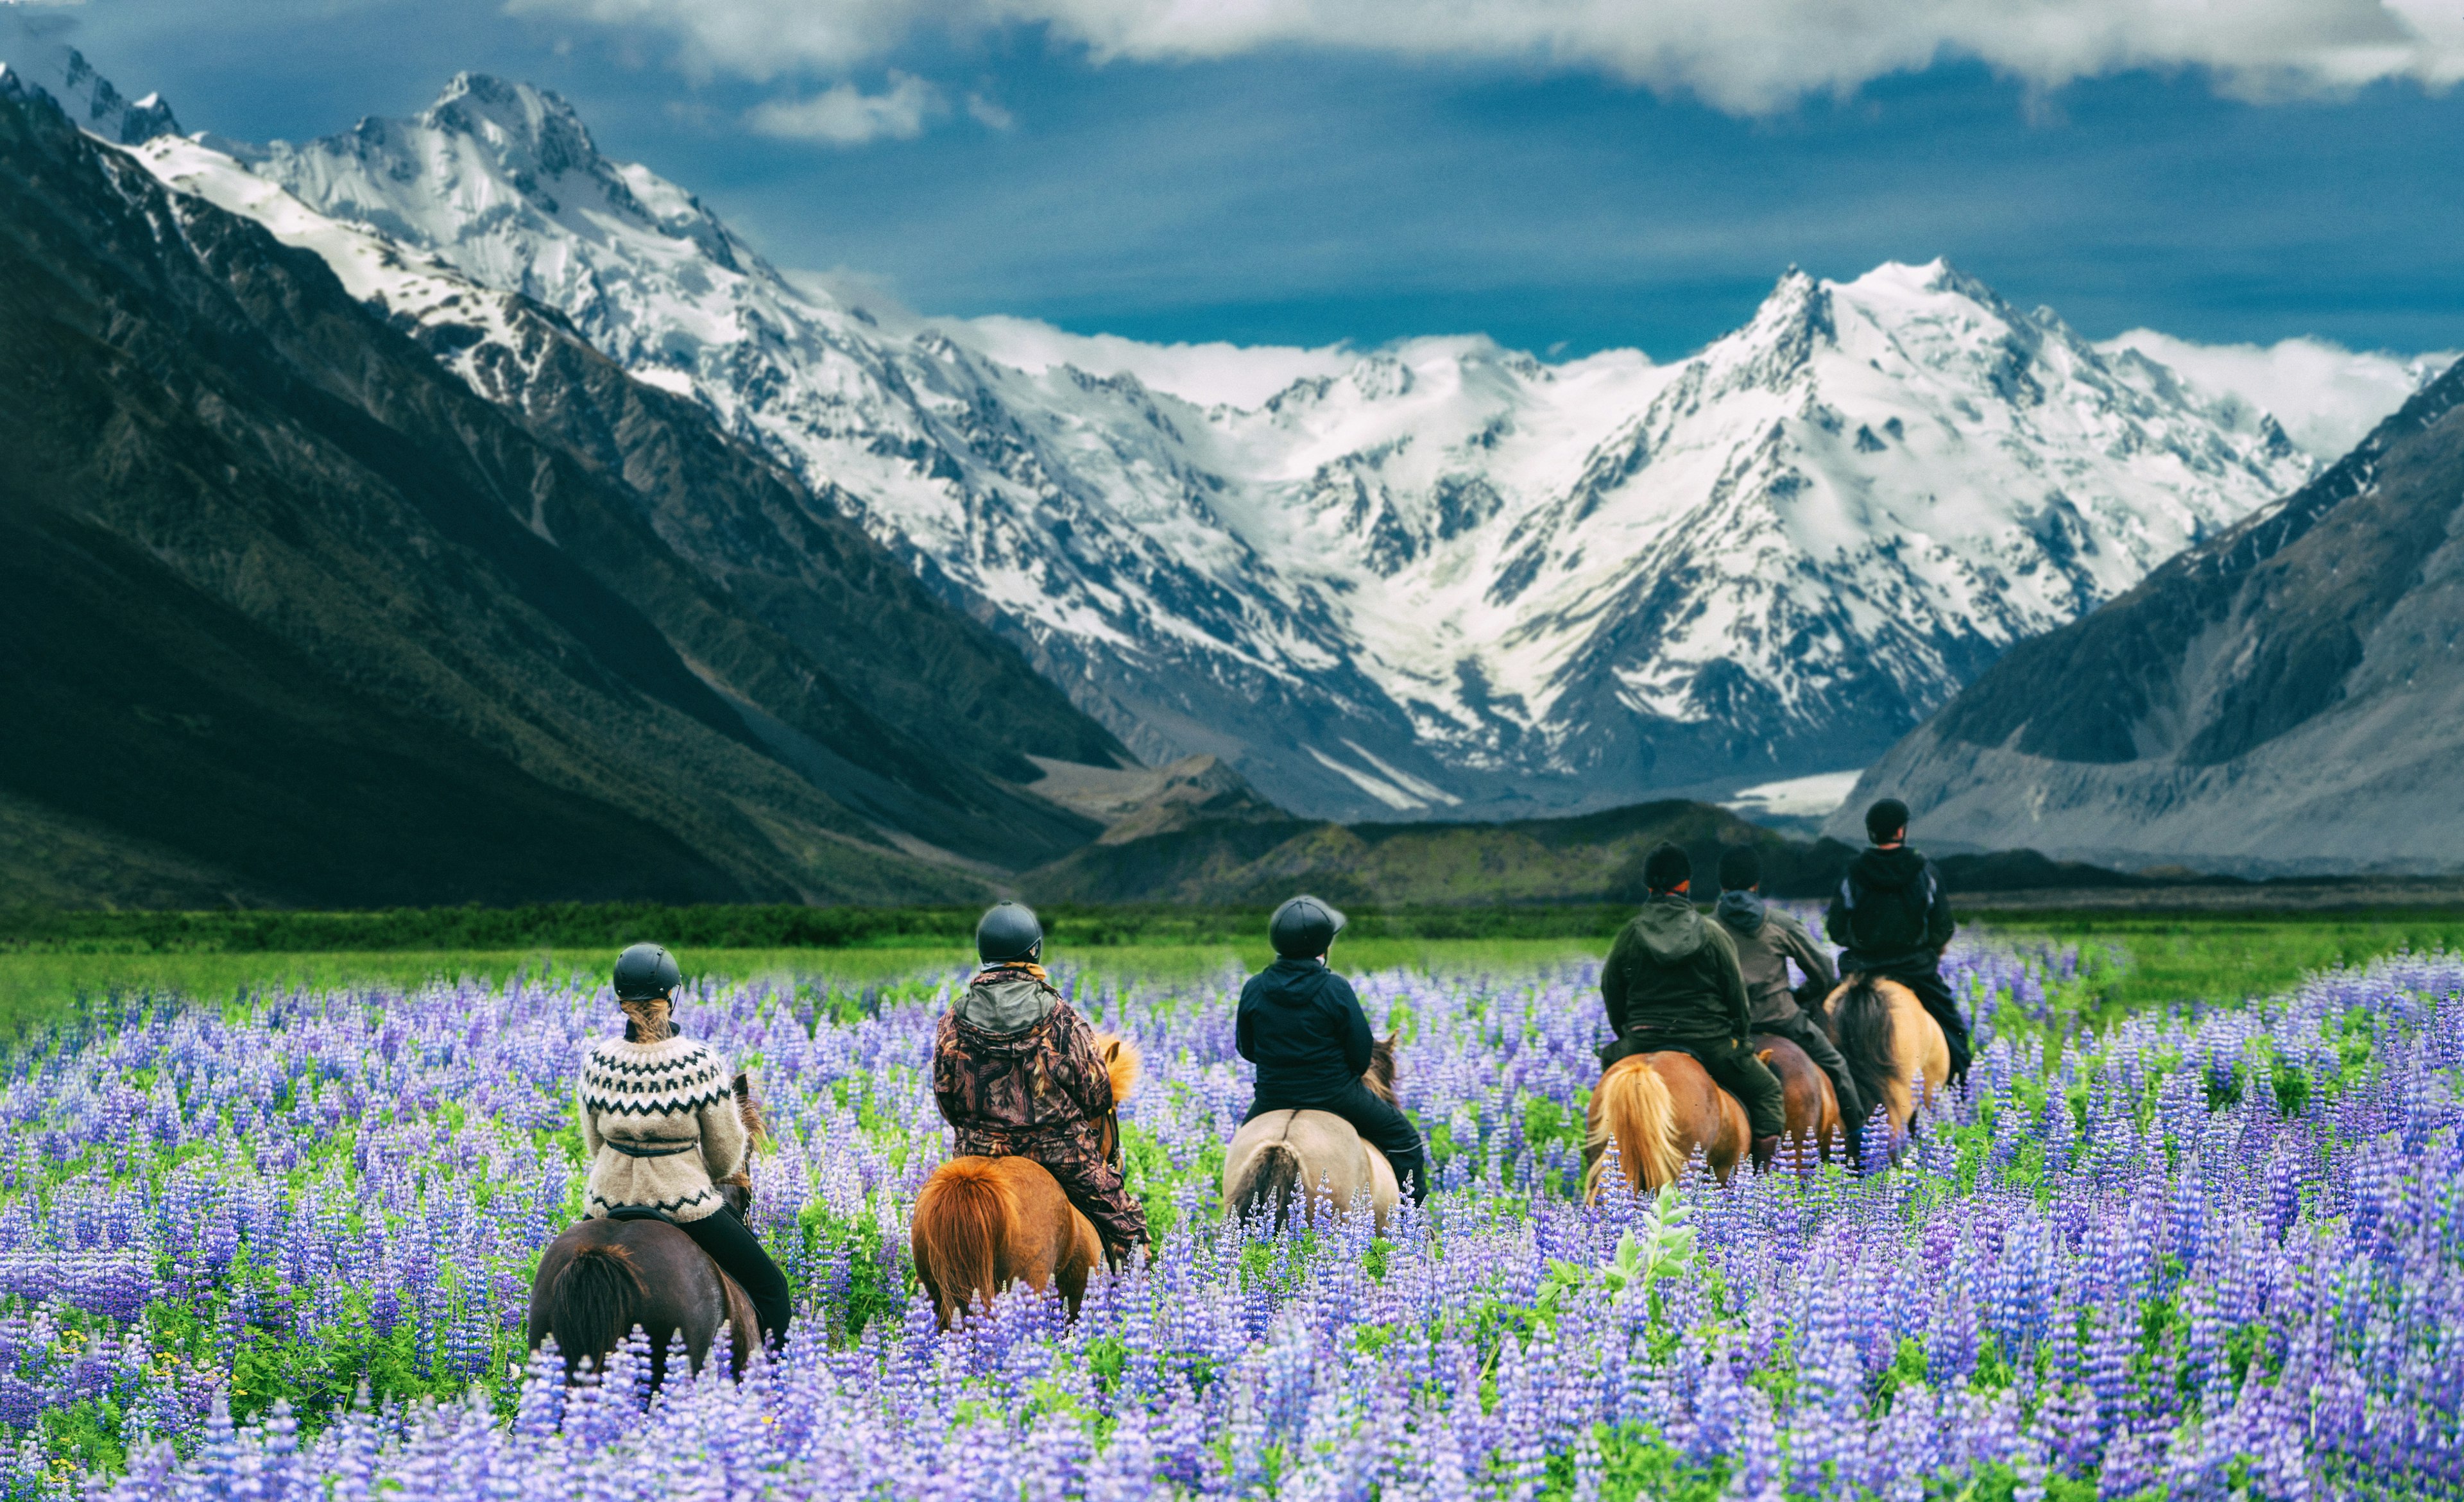 Travelers ride horses in lupine flower field, overlooking the beautiful landscape of Mt Cook National Park in New Zealand. Lupins hit full bloom in December to January which is summer of New Zealand.
1172642617
activity, background, beautiful, blooming, excursion, field, green, group, horse riding, horseback, horsemen, landscape, leisure, lupine, mountains, nz, panorama, range, rural, scenery, spring, team, top, traveler, view, white, zealand